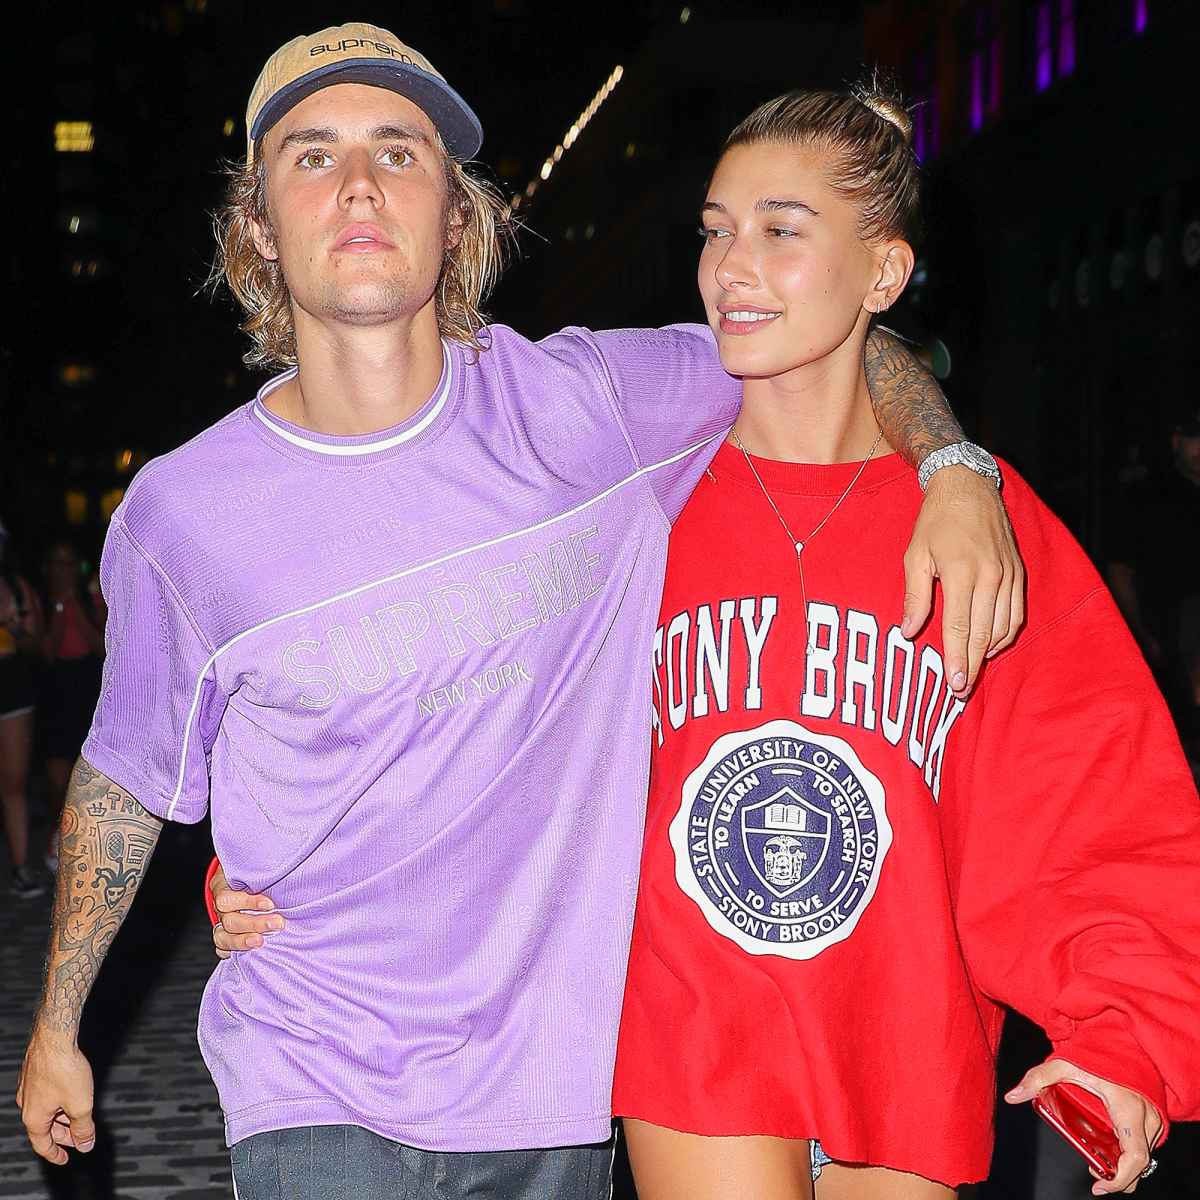 Hailey Baldwin With Justin Bieber in the Hamptons July 2, 2018 – Star Style